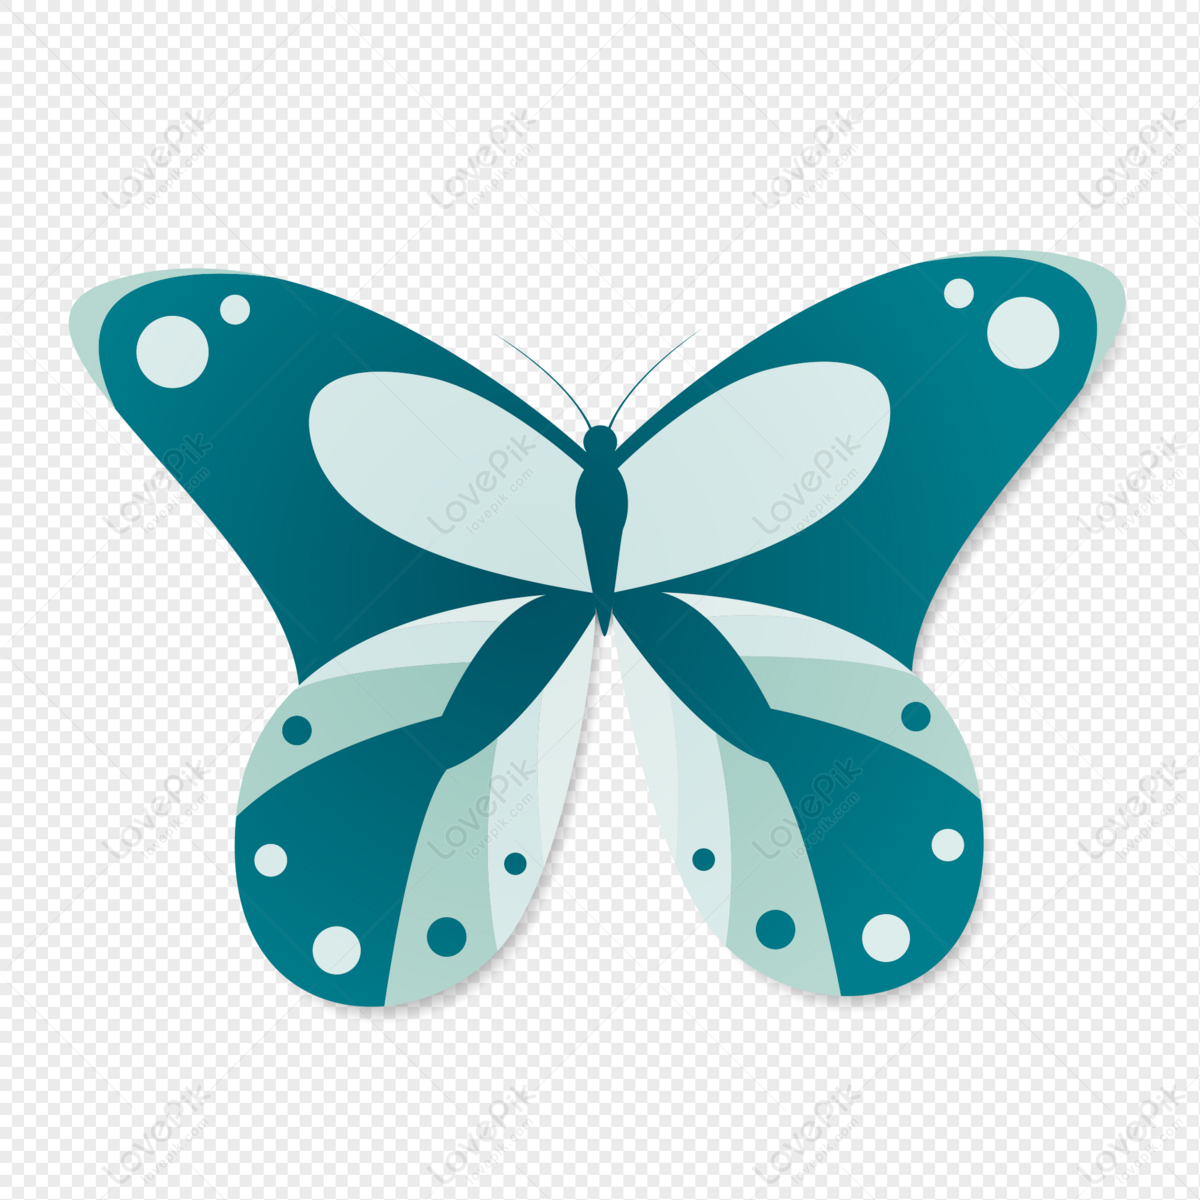 Cartoon Butterfly PNG Transparent Image And Clipart Image For Free Download  - Lovepik | 401469397